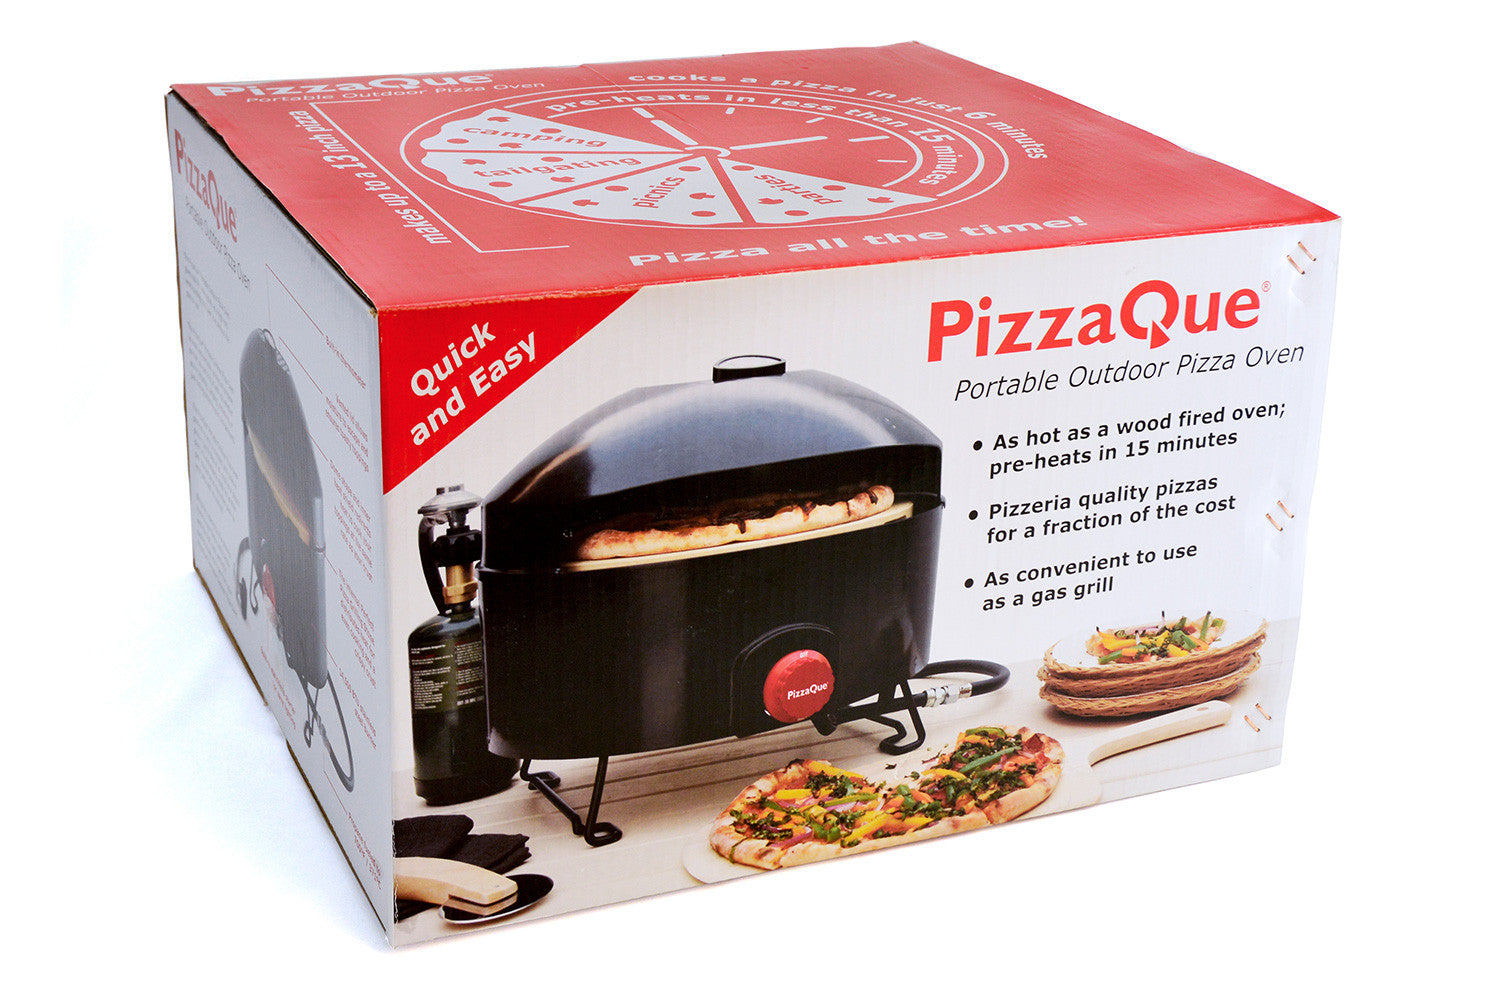 Packaging for the PizzaQue Portable Pizza Oven